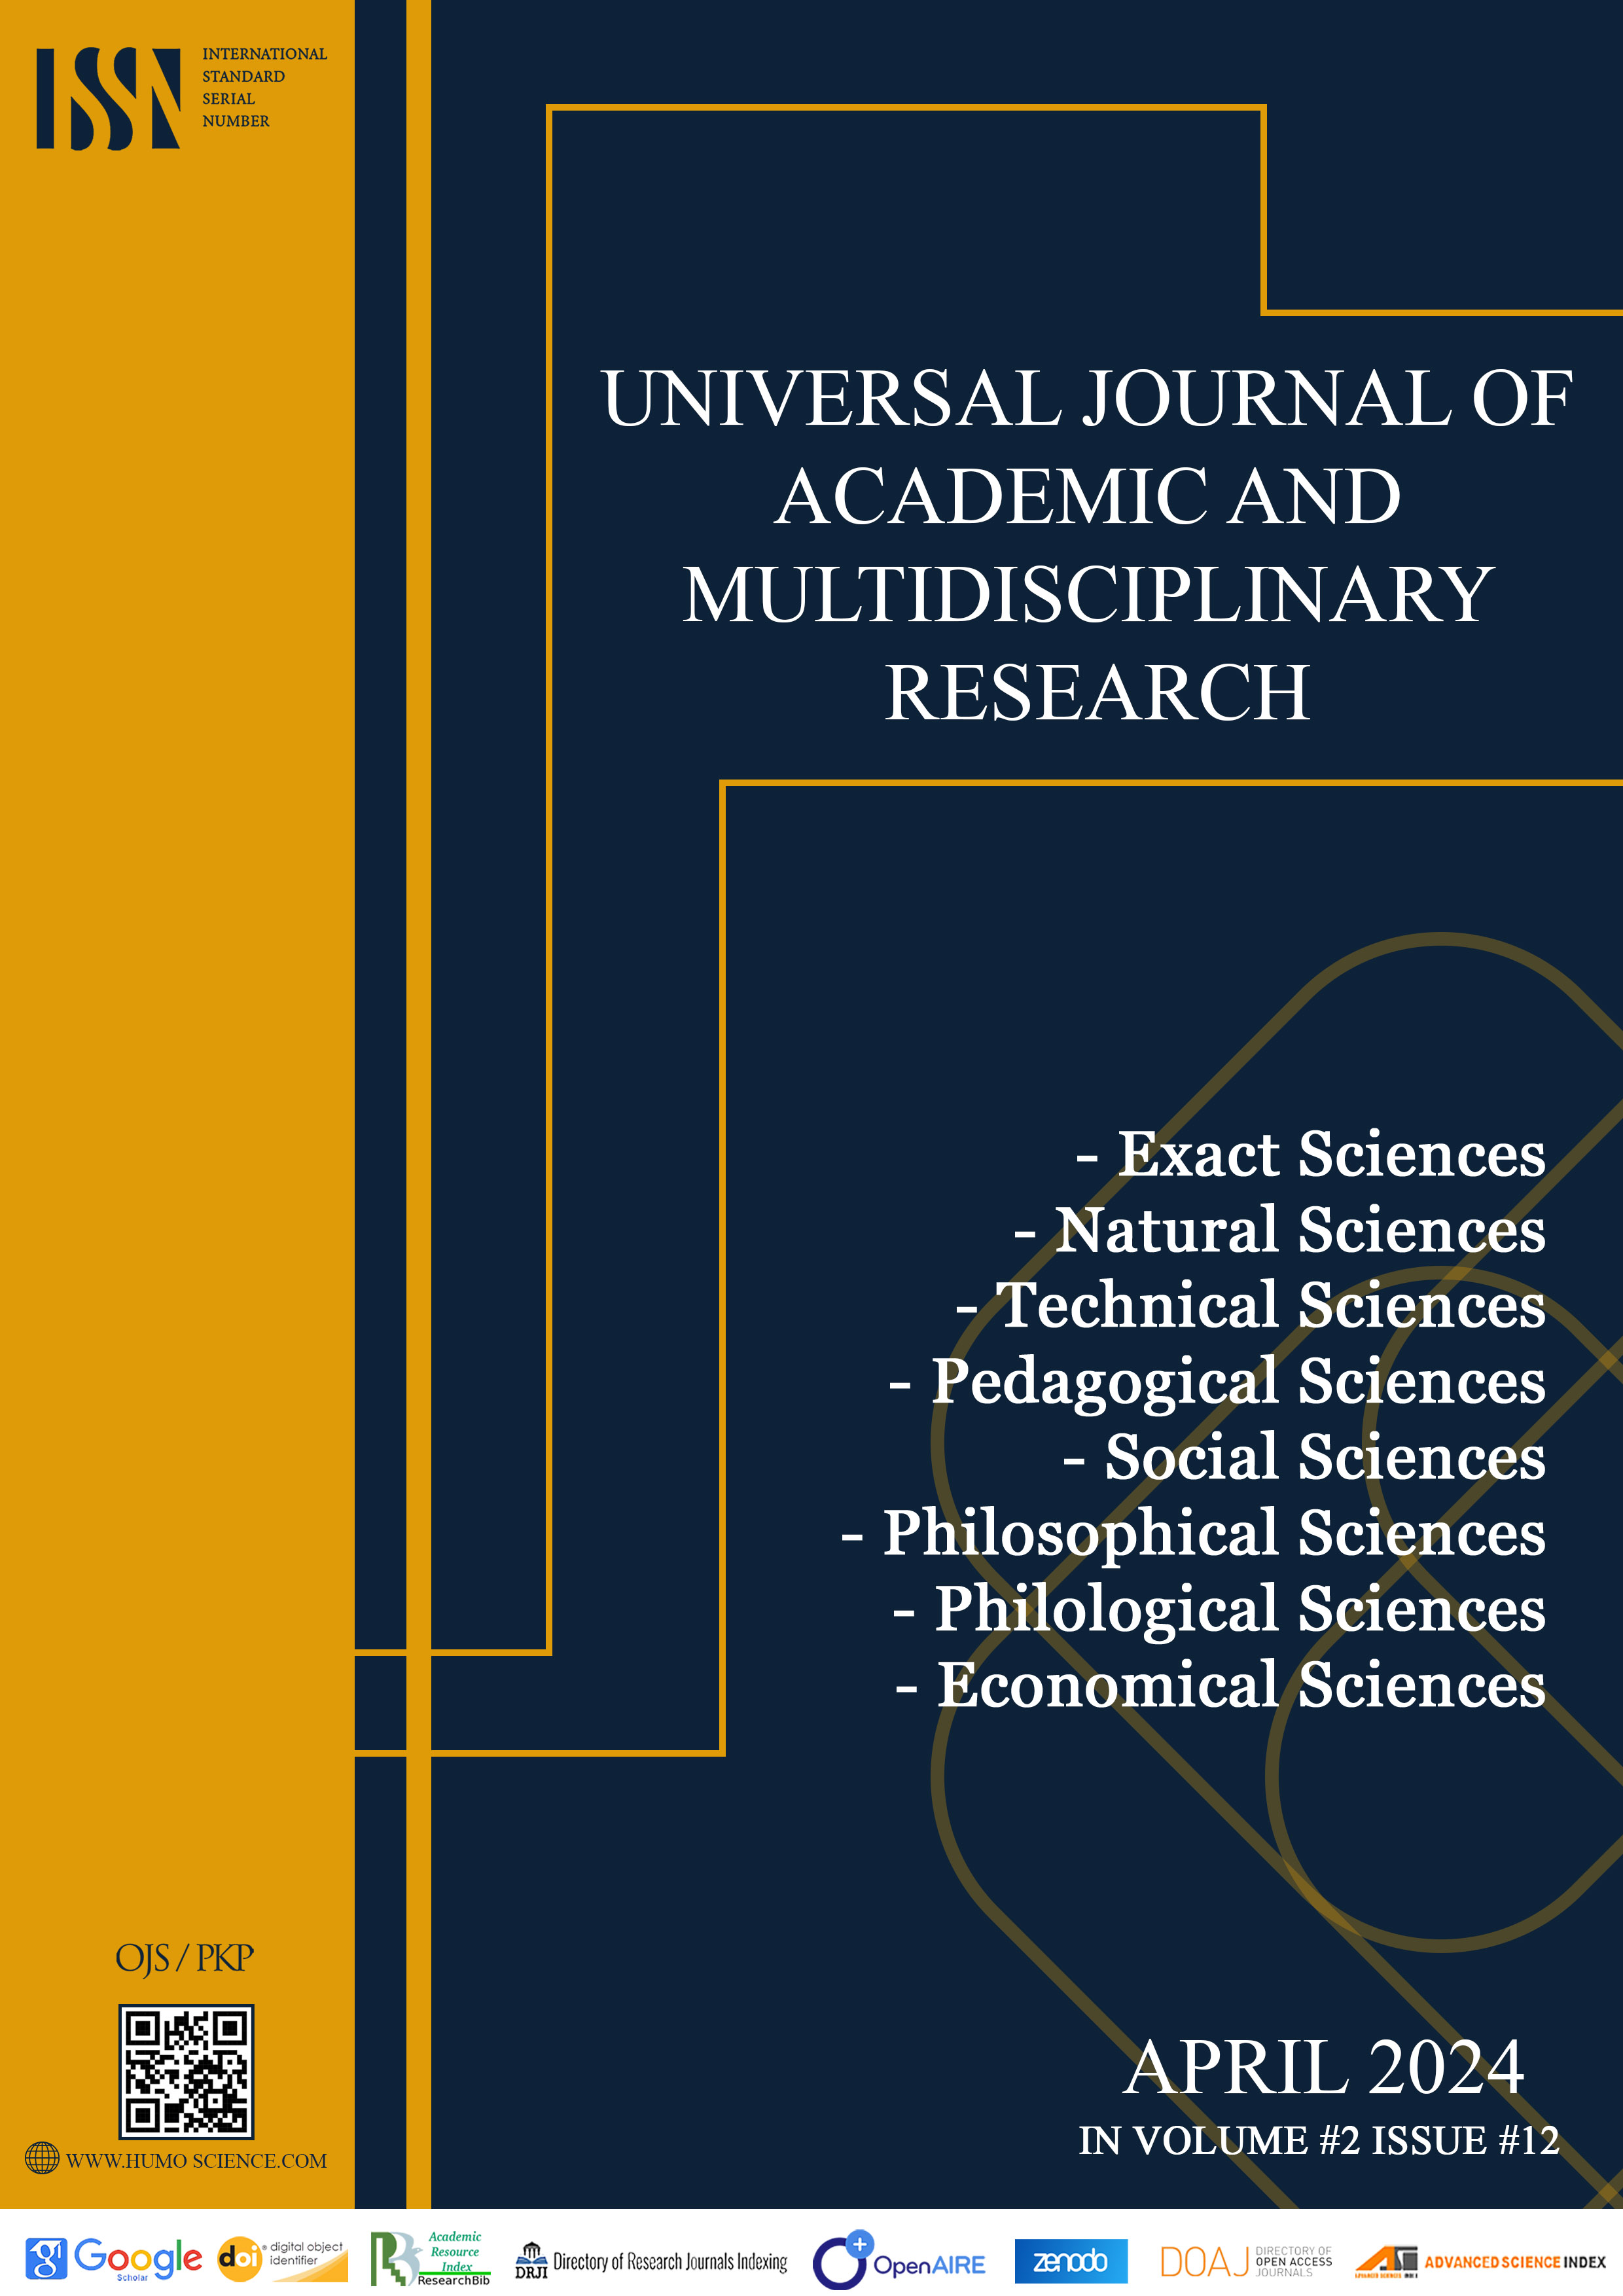 					View Vol. 2 No. 12 (2022): UNIVERSAL JOURNAL OF ACADEMIC AND MULTIDISCIPLINARY RESEARCH
				